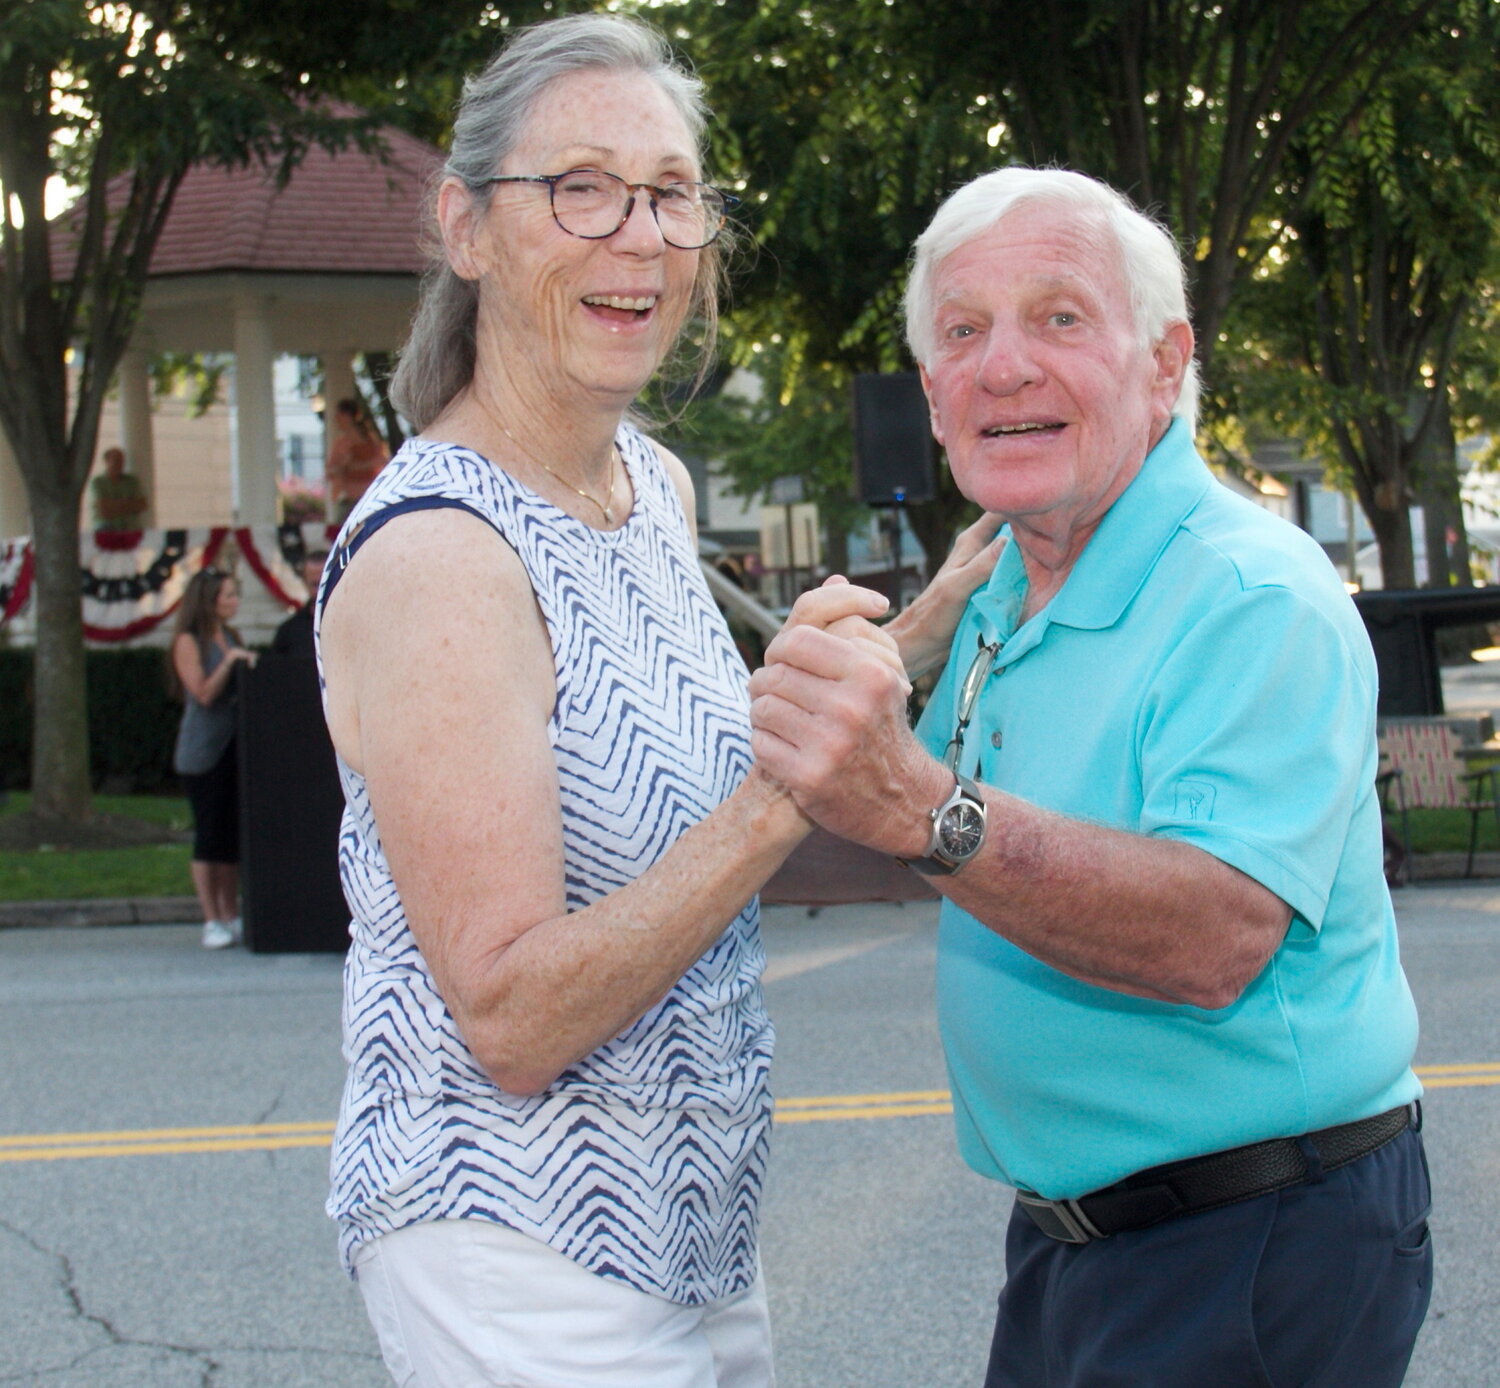 Ann and Lorey Pollack enjoyed participating in the many types of dances.